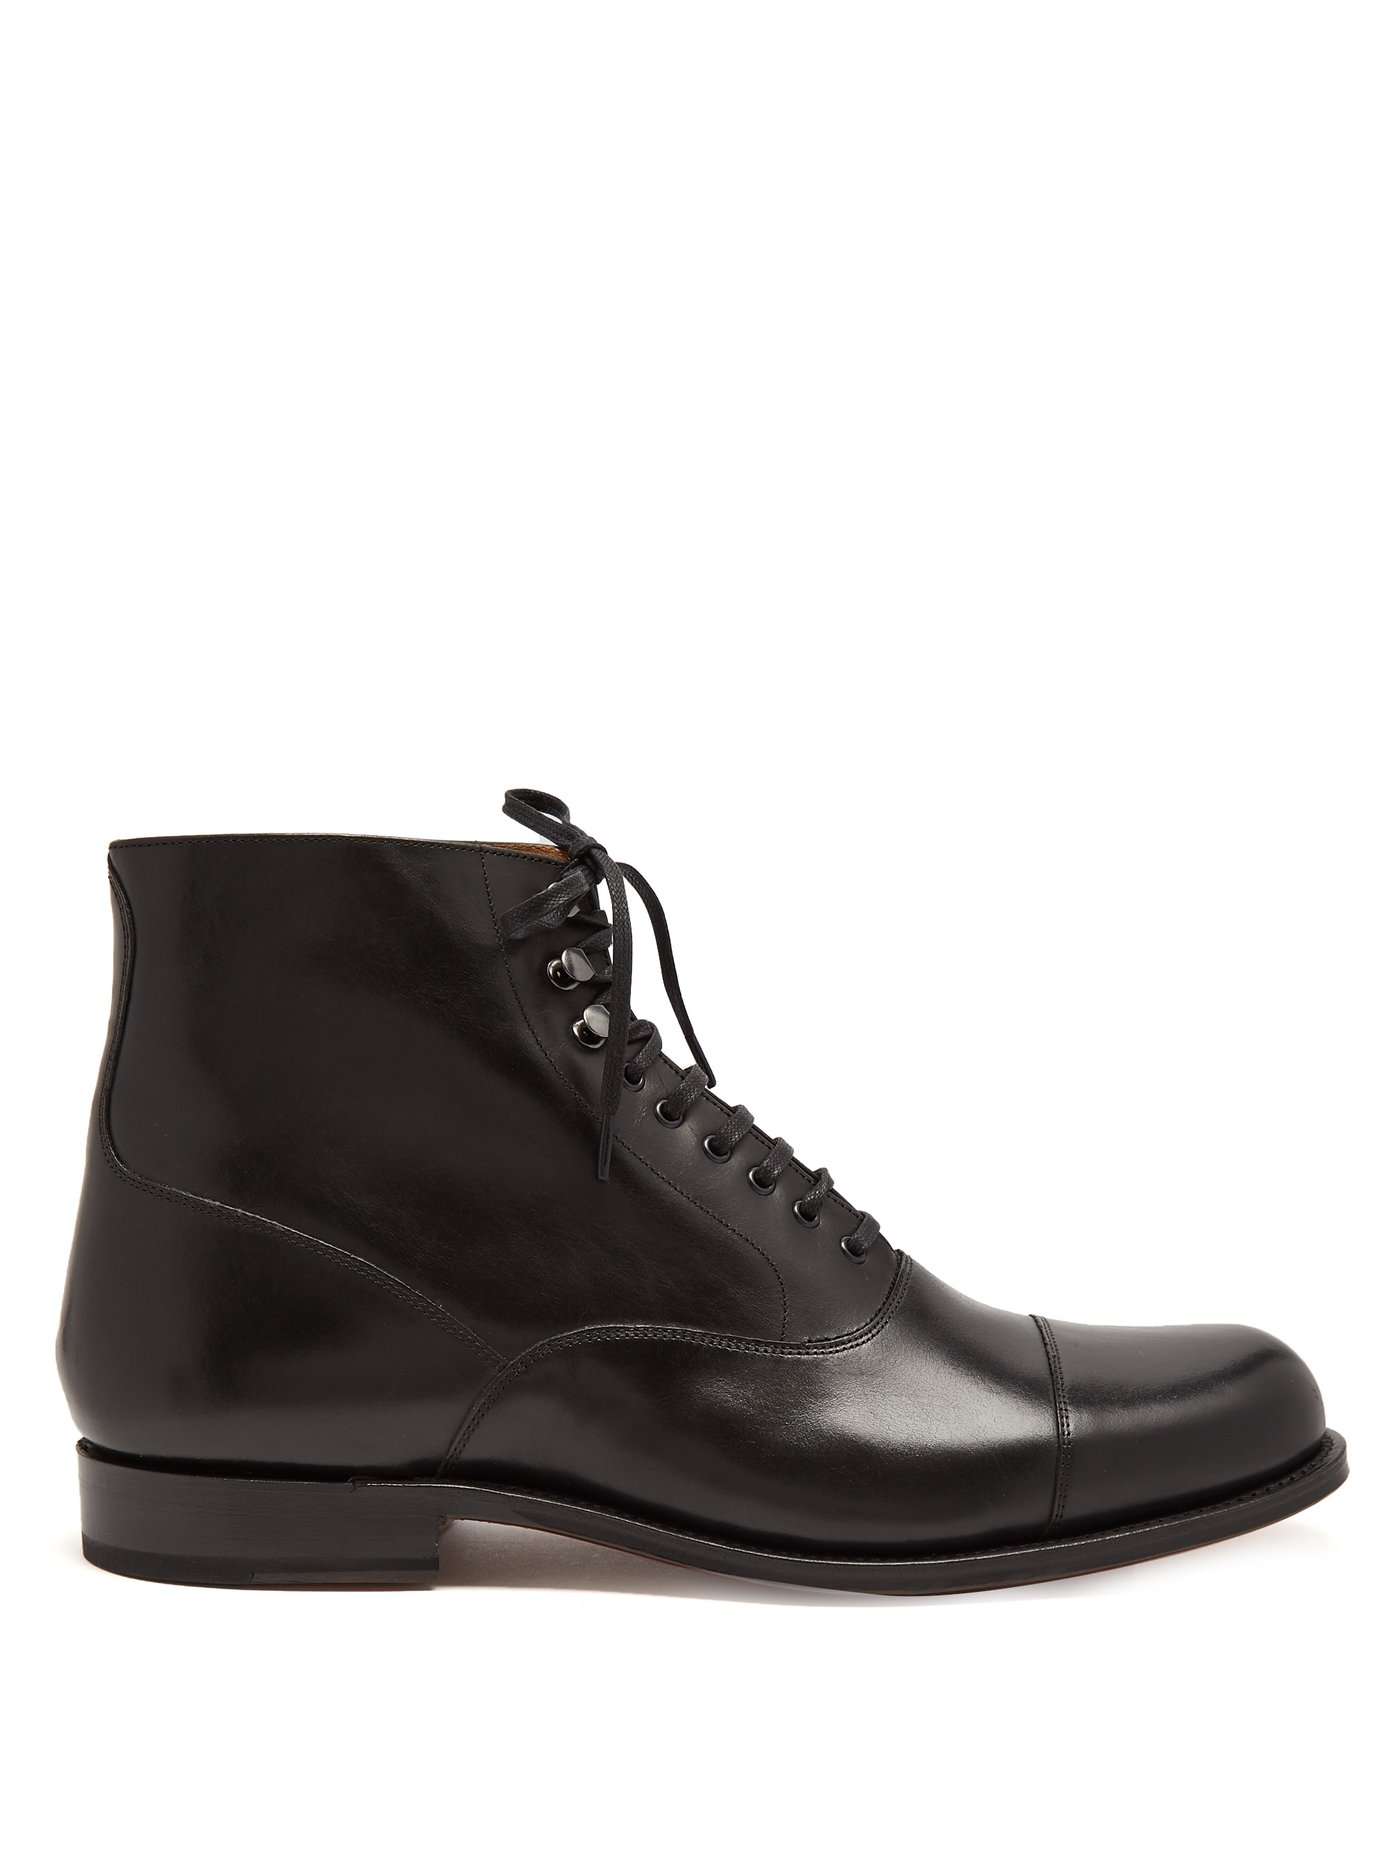 Leander leather boots | Grenson 